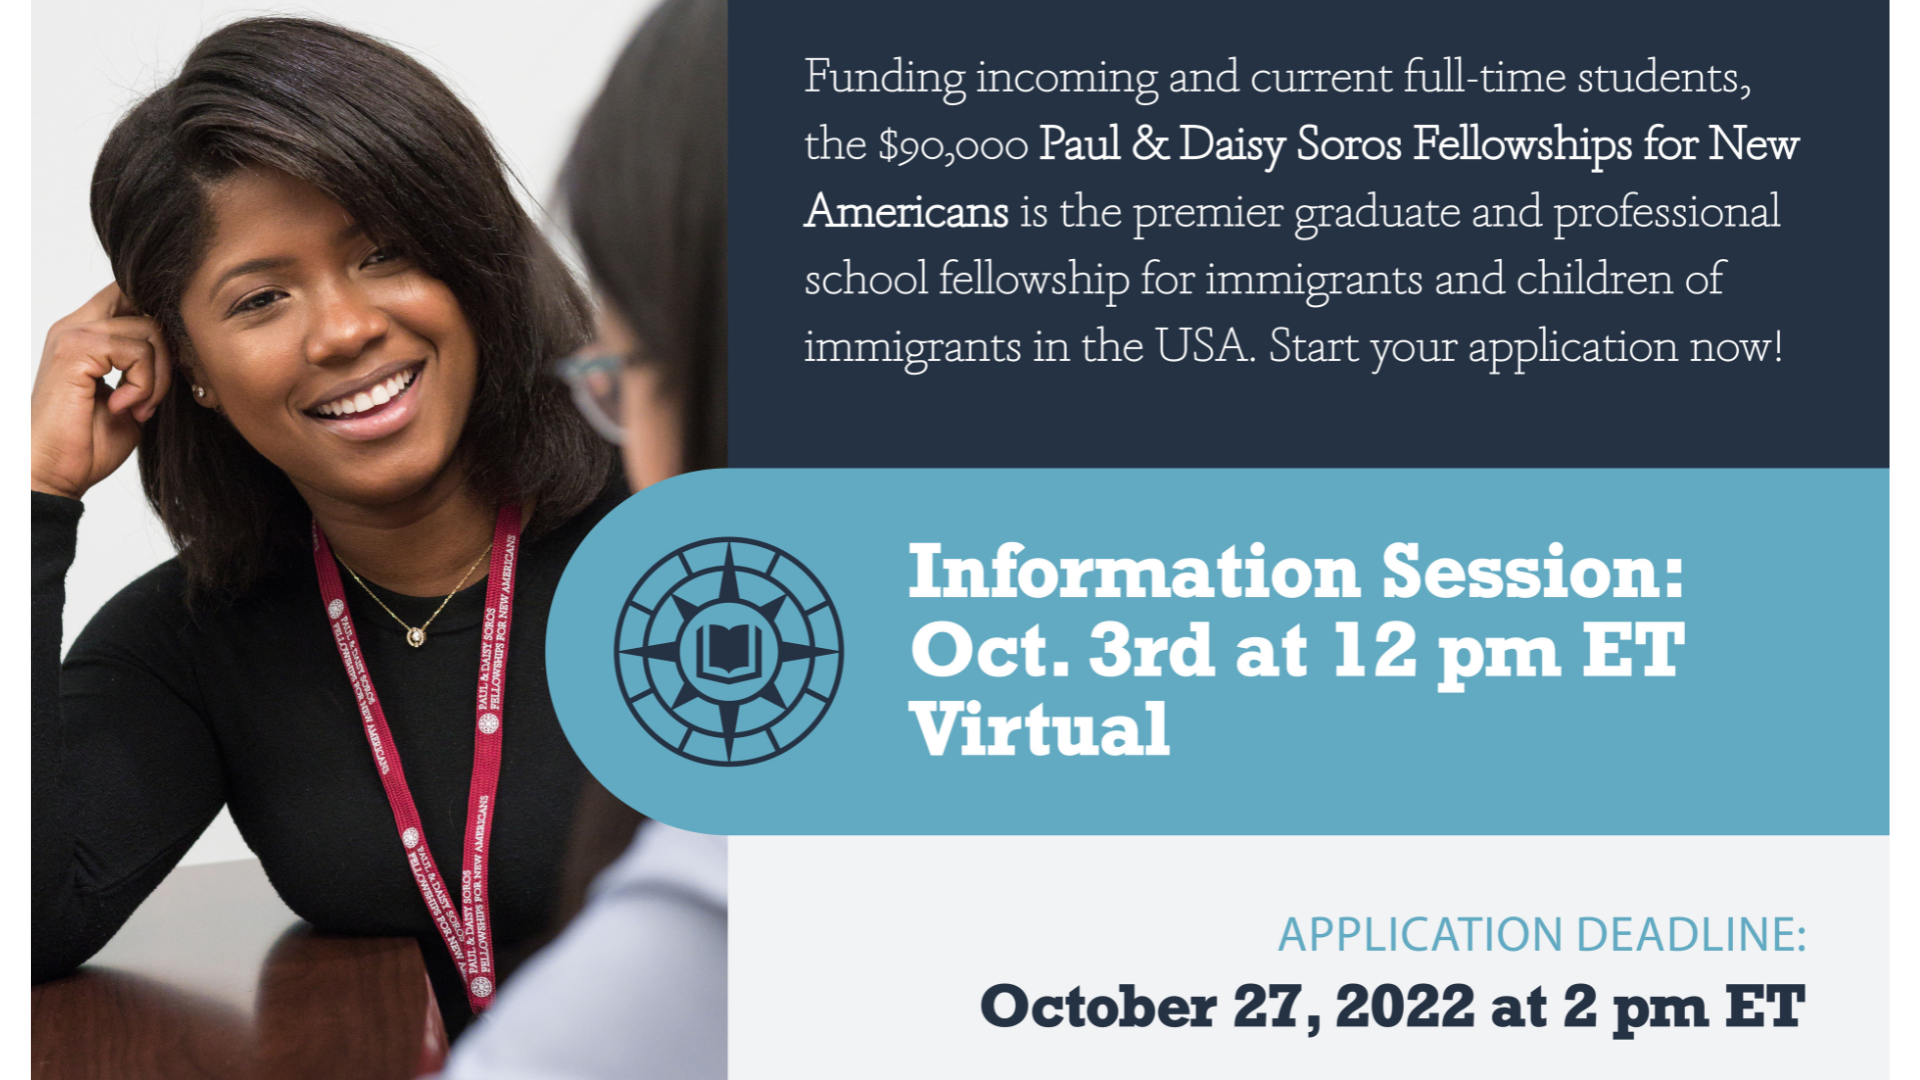 Infographic with information about Soros Fellowship. Information Session: Oct. 3rd at 12 p.m. ET, virtual, Application deadline: Oct. 27, 2022 at 2 p.m. ET